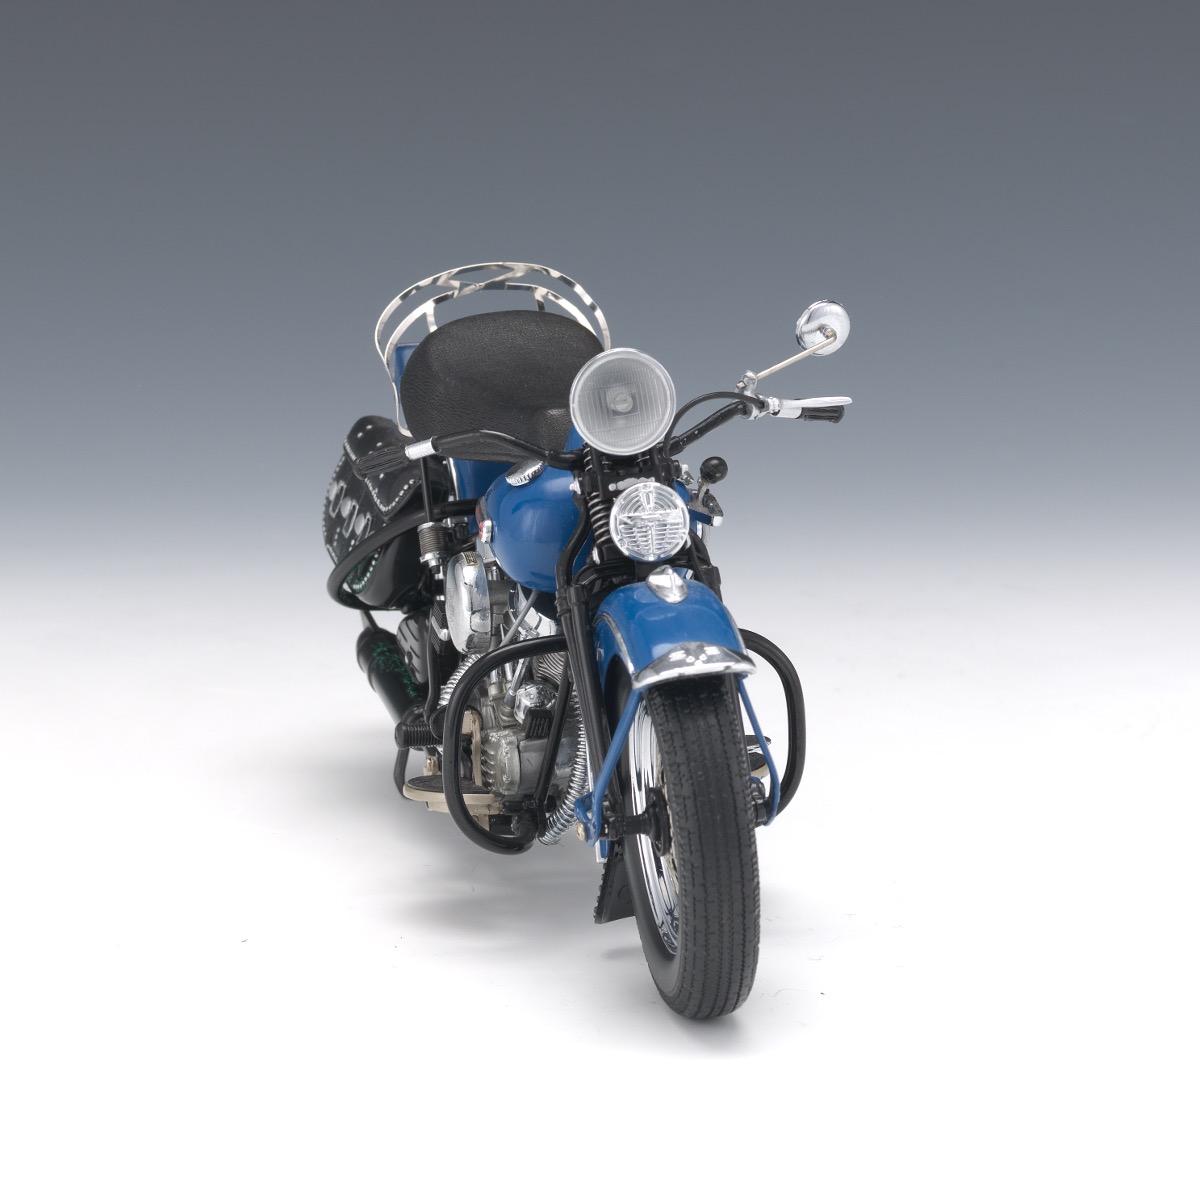 Harley-Davidson 1948 Panhead Motorcycle, Precision Model, Scale 1:10 - Image 3 of 7